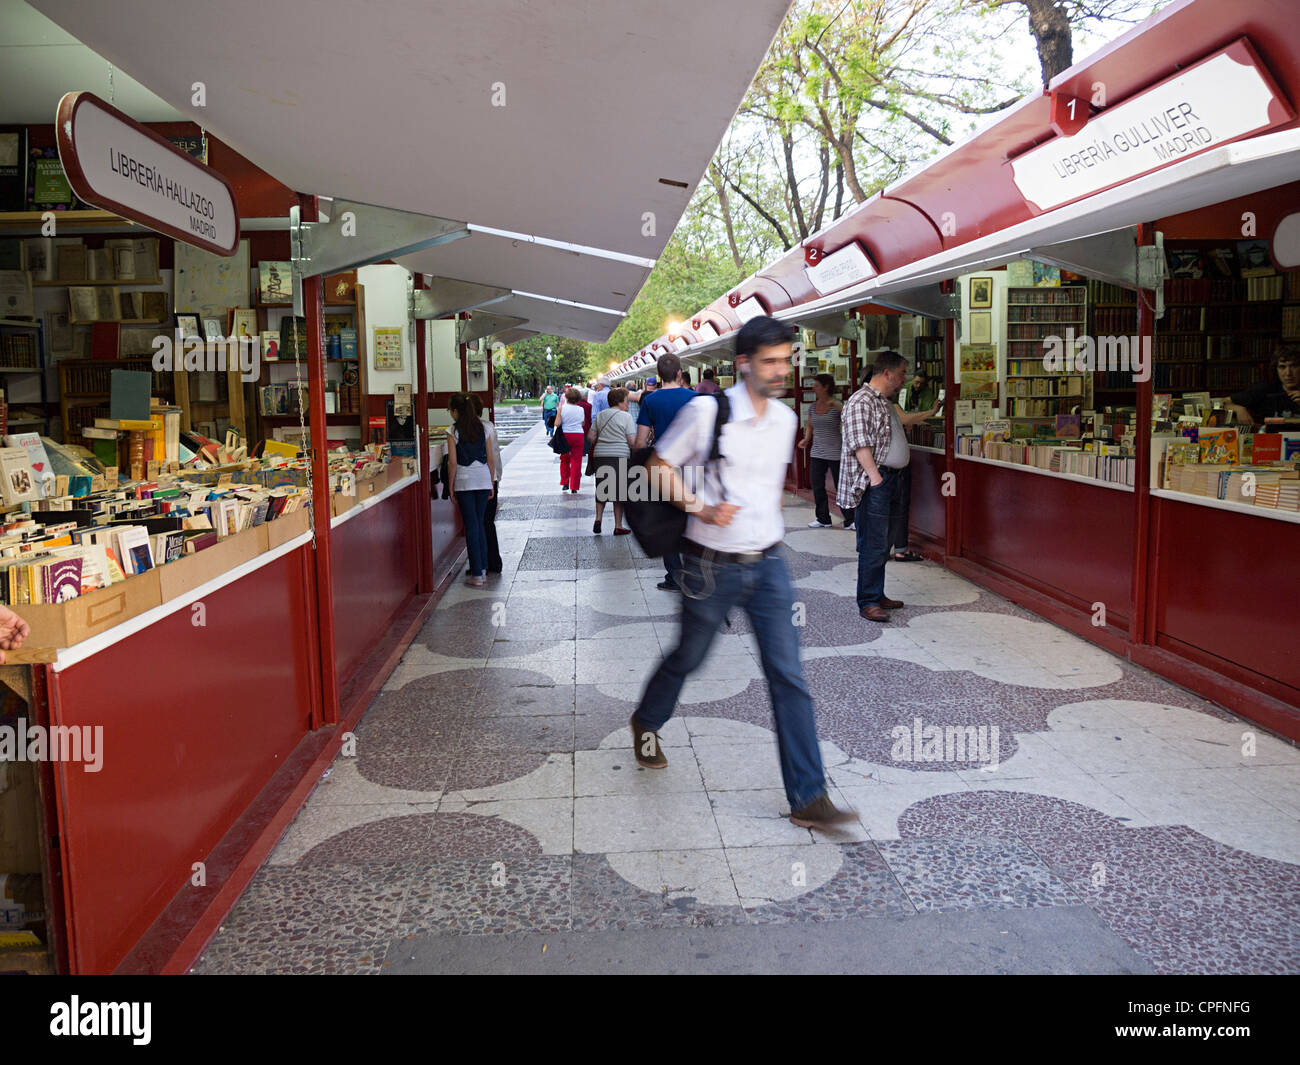 Feria Libro Madrid High Resolution Stock Photography and Images - Alamy